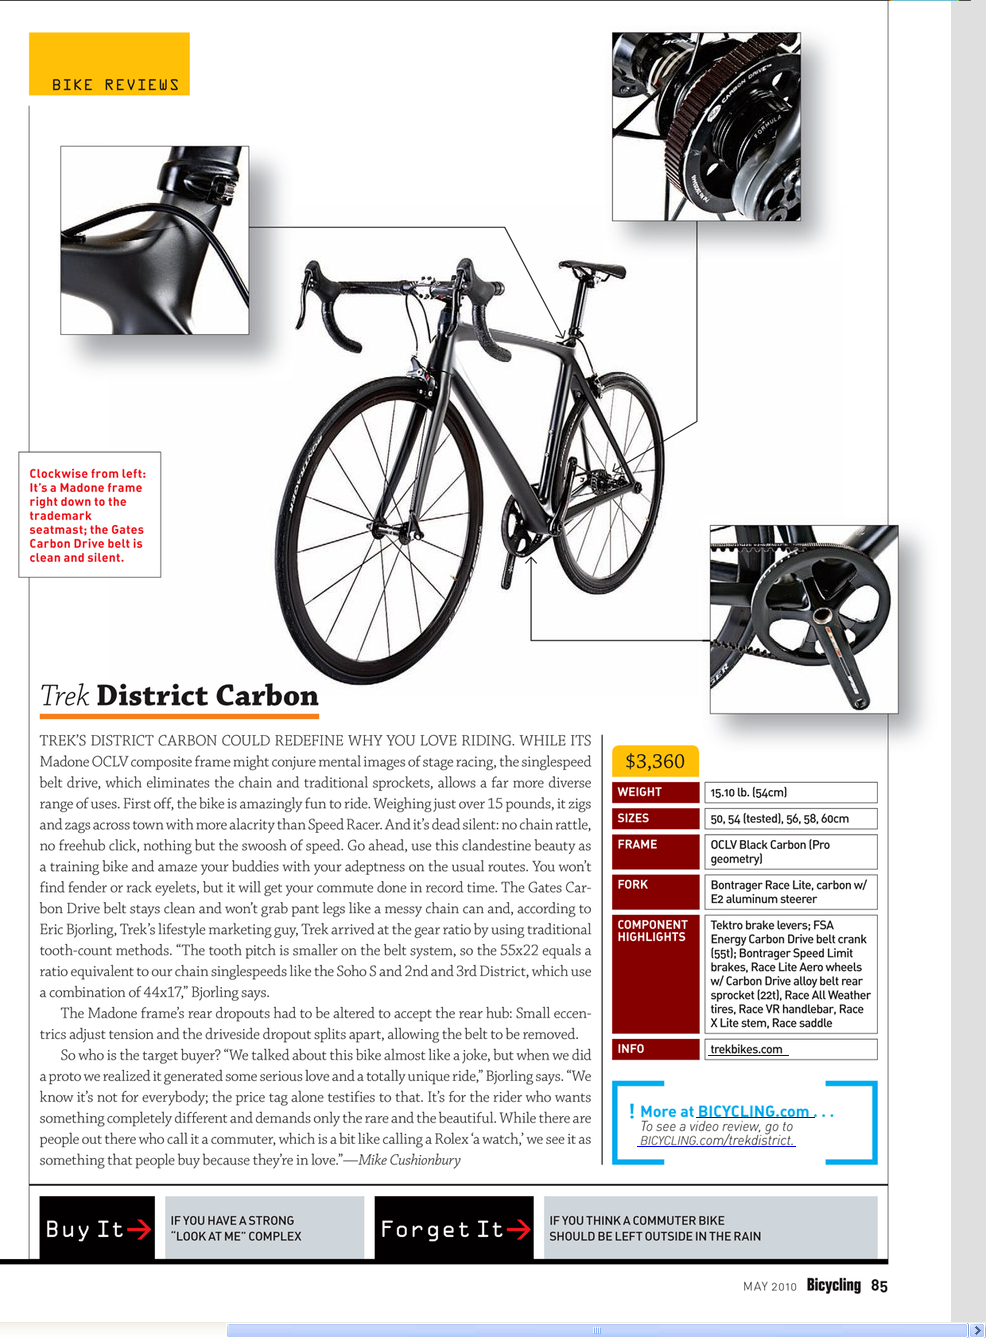 Bicycling Mag Gates Carbon Drive